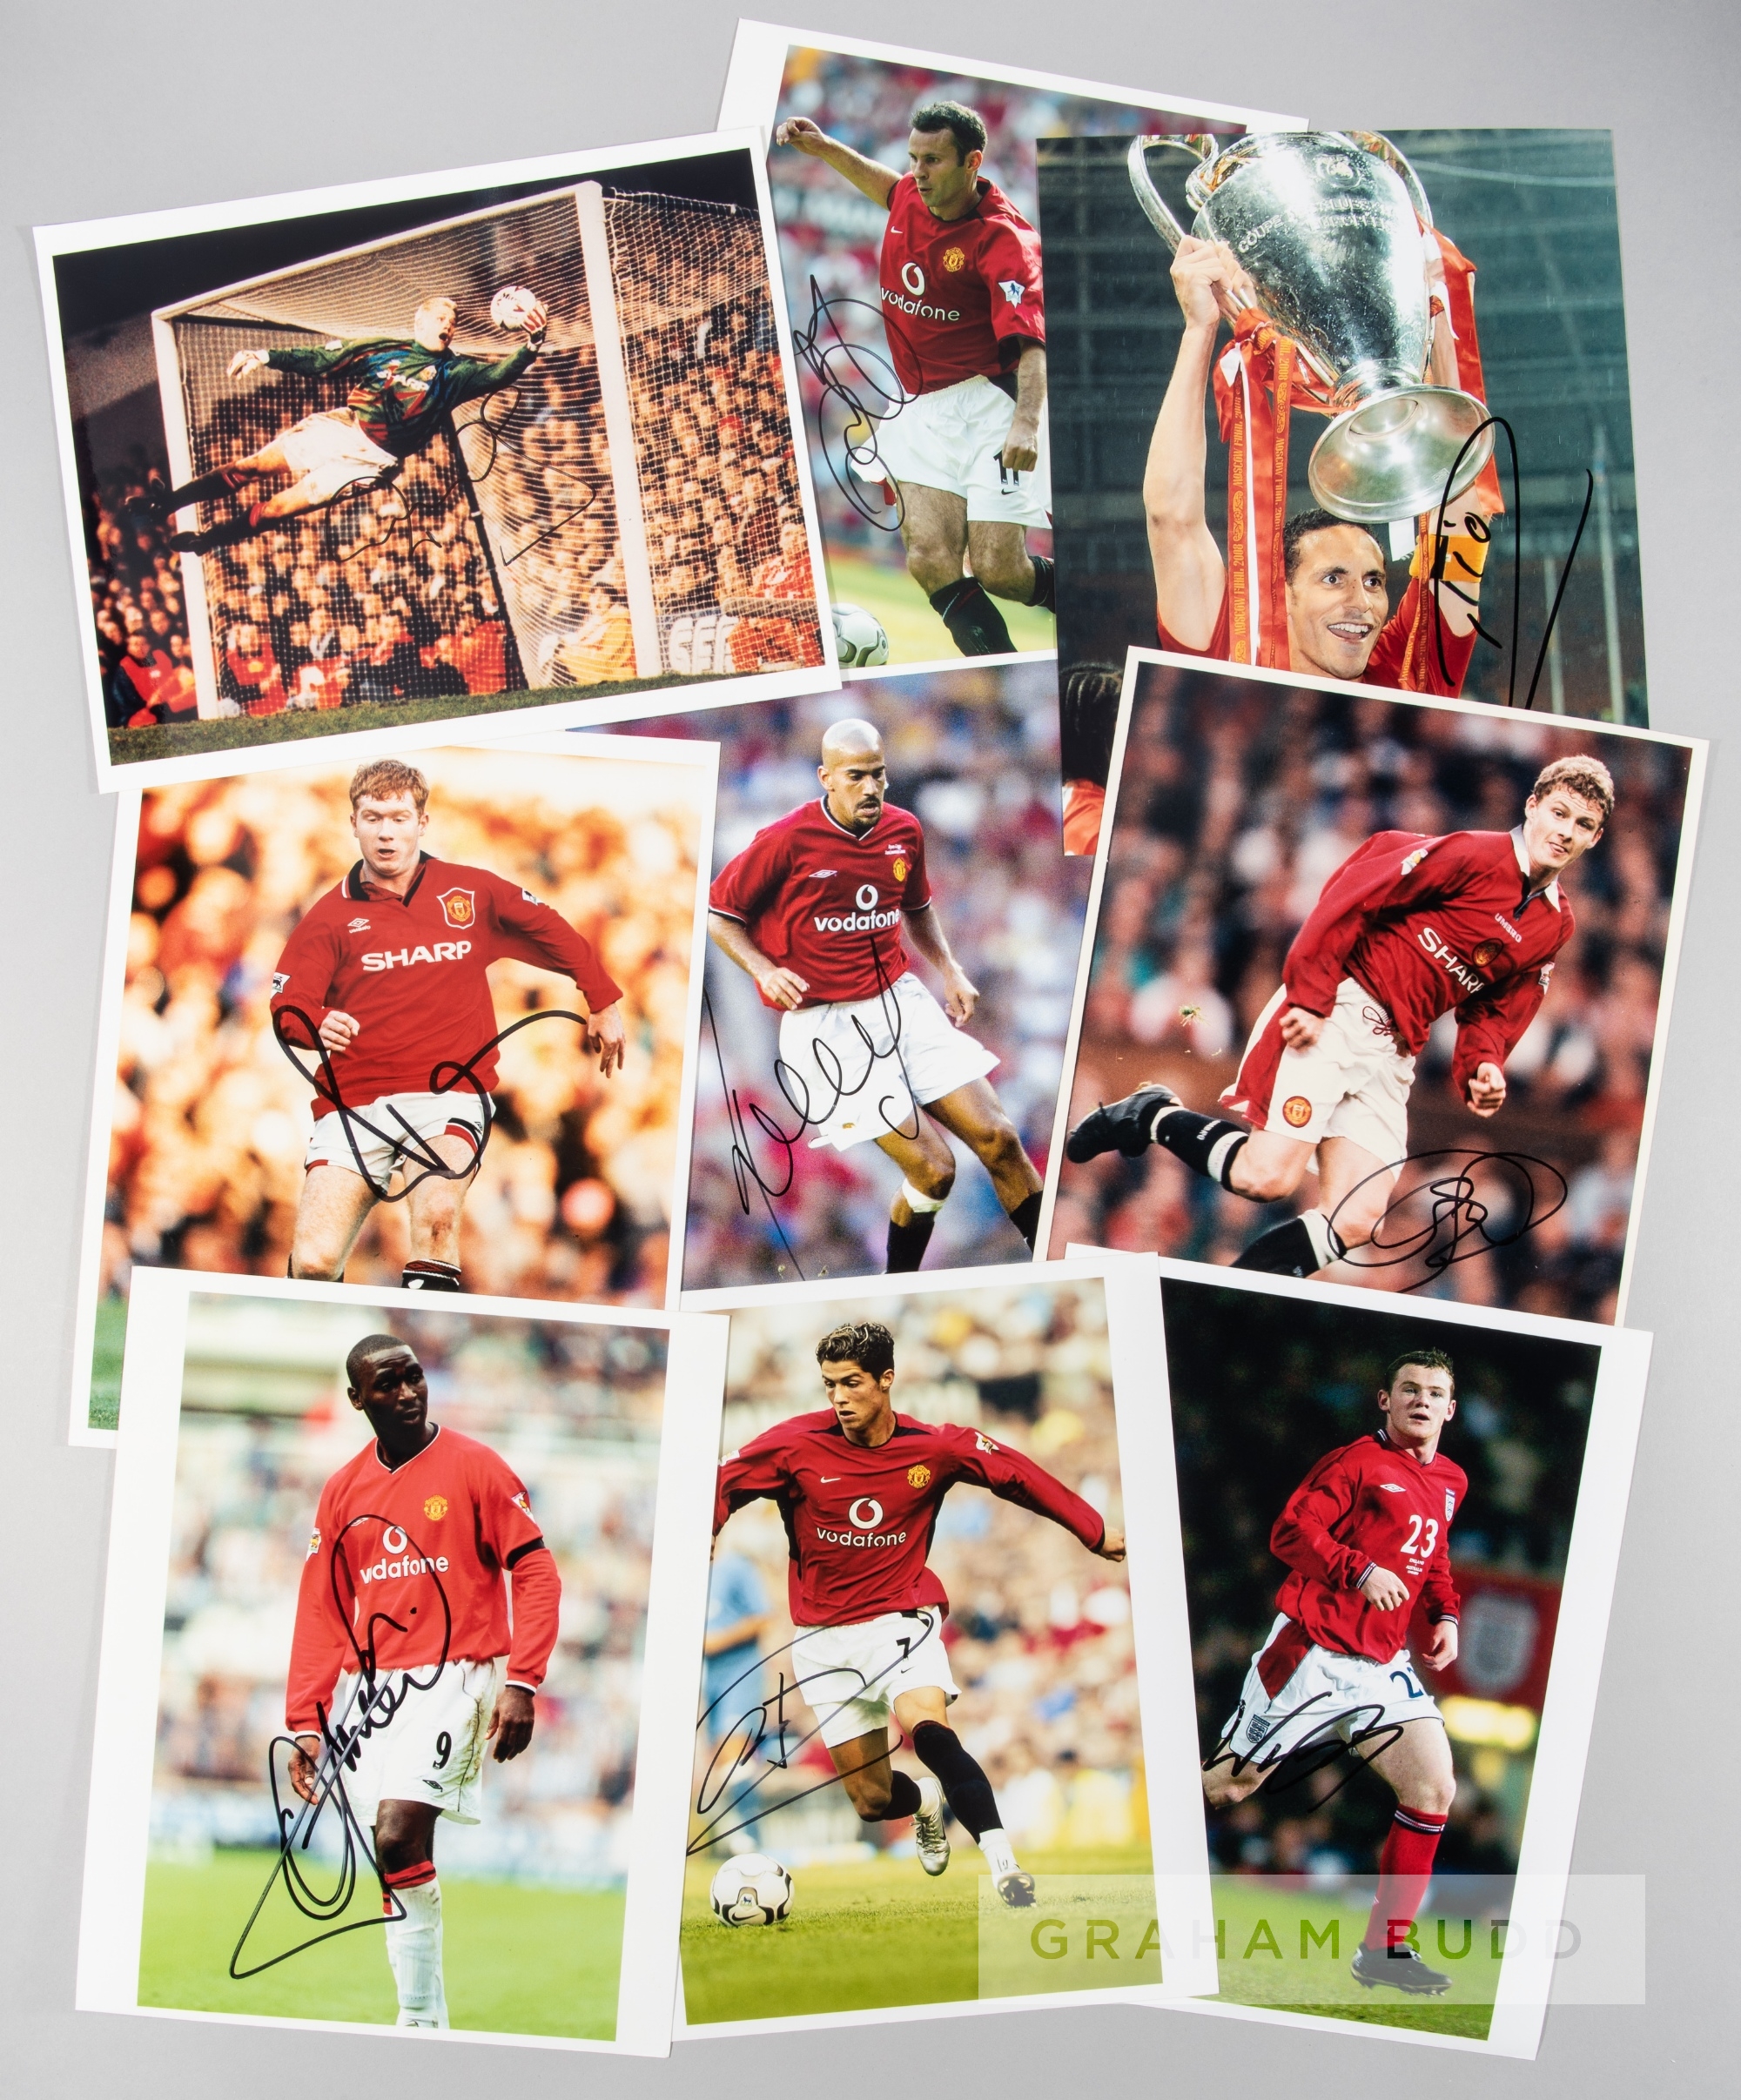 Signed Manchester United colour photographs of legendary players, 10 by 8in. including Ronaldo,